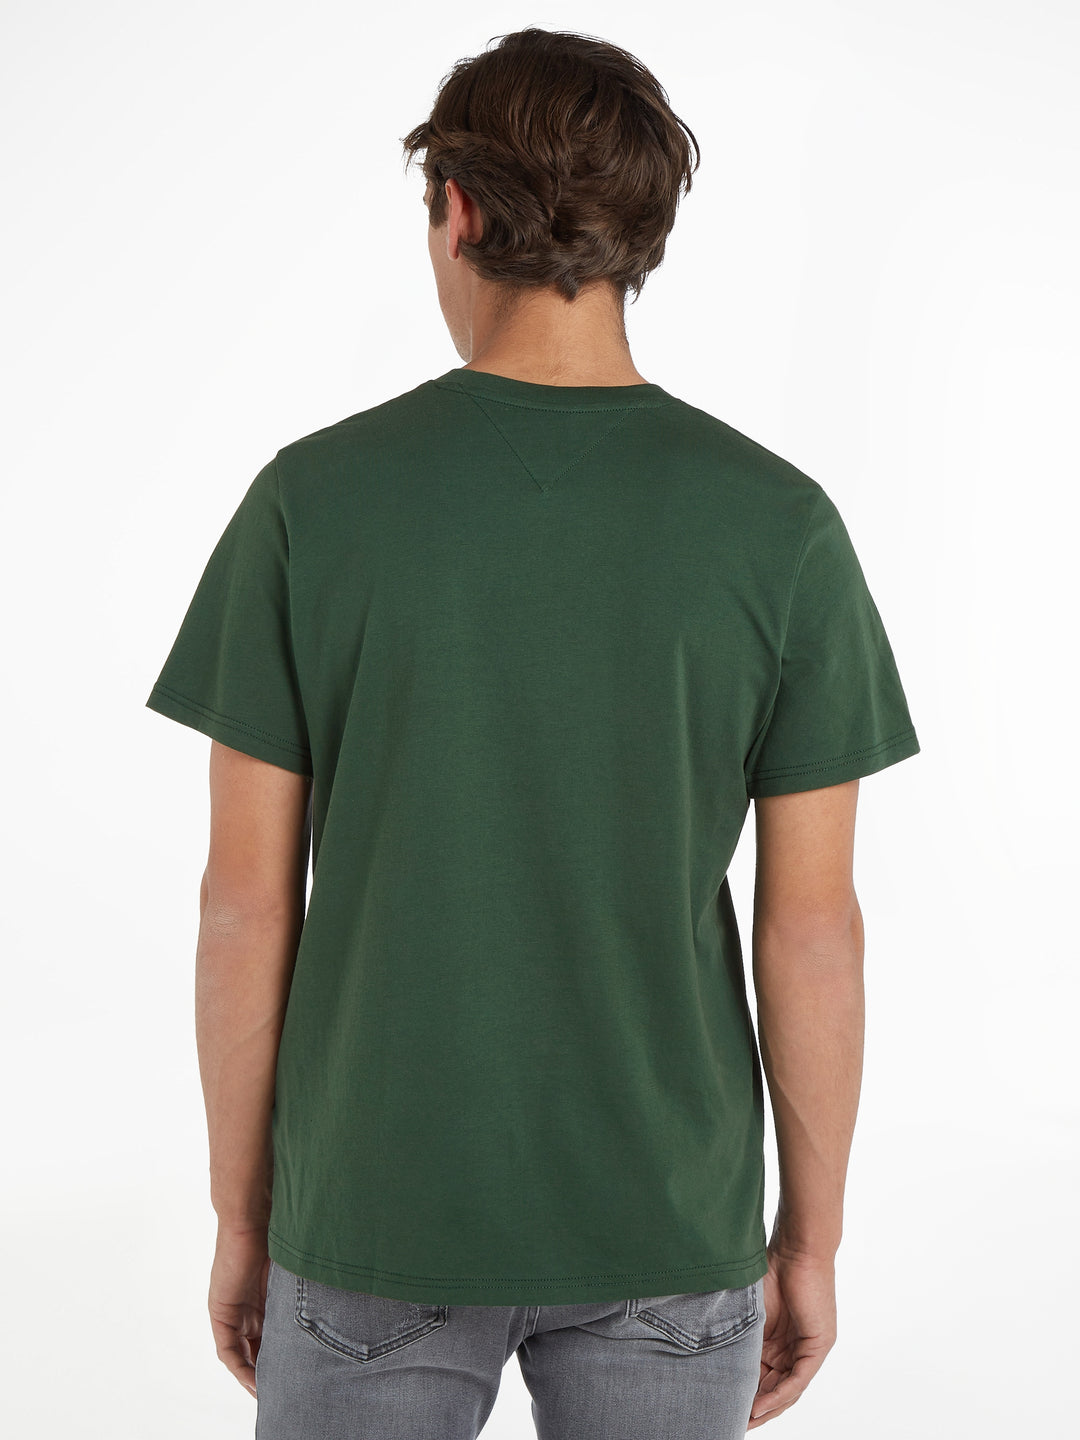 TJ RGLR ENTRY GRAPHIC TEE - GREEN